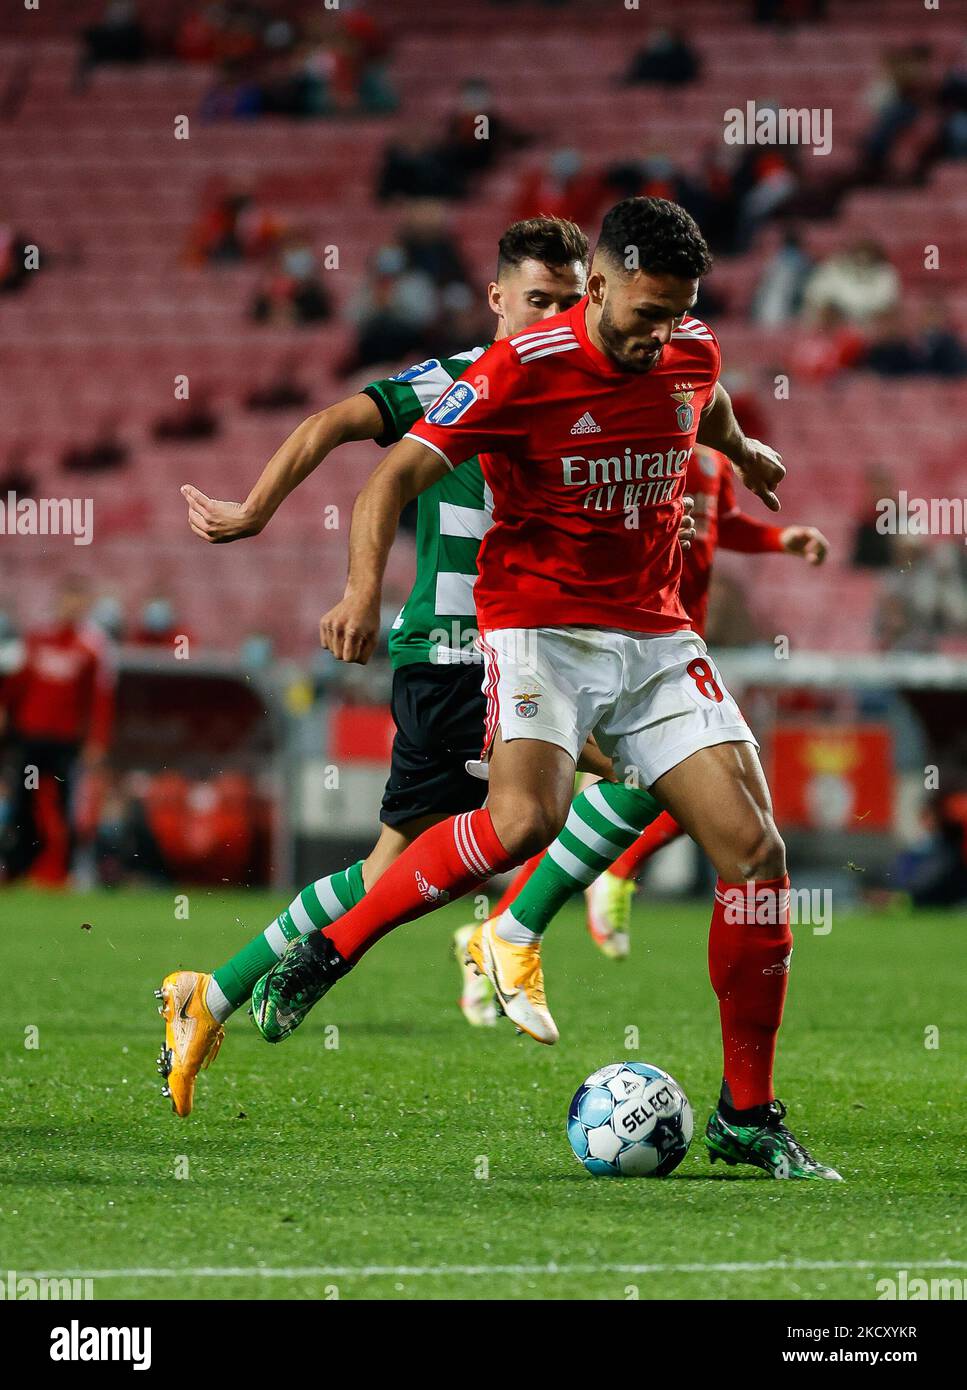 Goncalo Ramos of SL Benfica during the Allianz Cup match between SL Benfica and SC Covilha at Estadio da Luz on December 15, 2021 in Lisbon, Portugal. (Photo by Paulo Nascimento/NurPhoto) Stock Photo